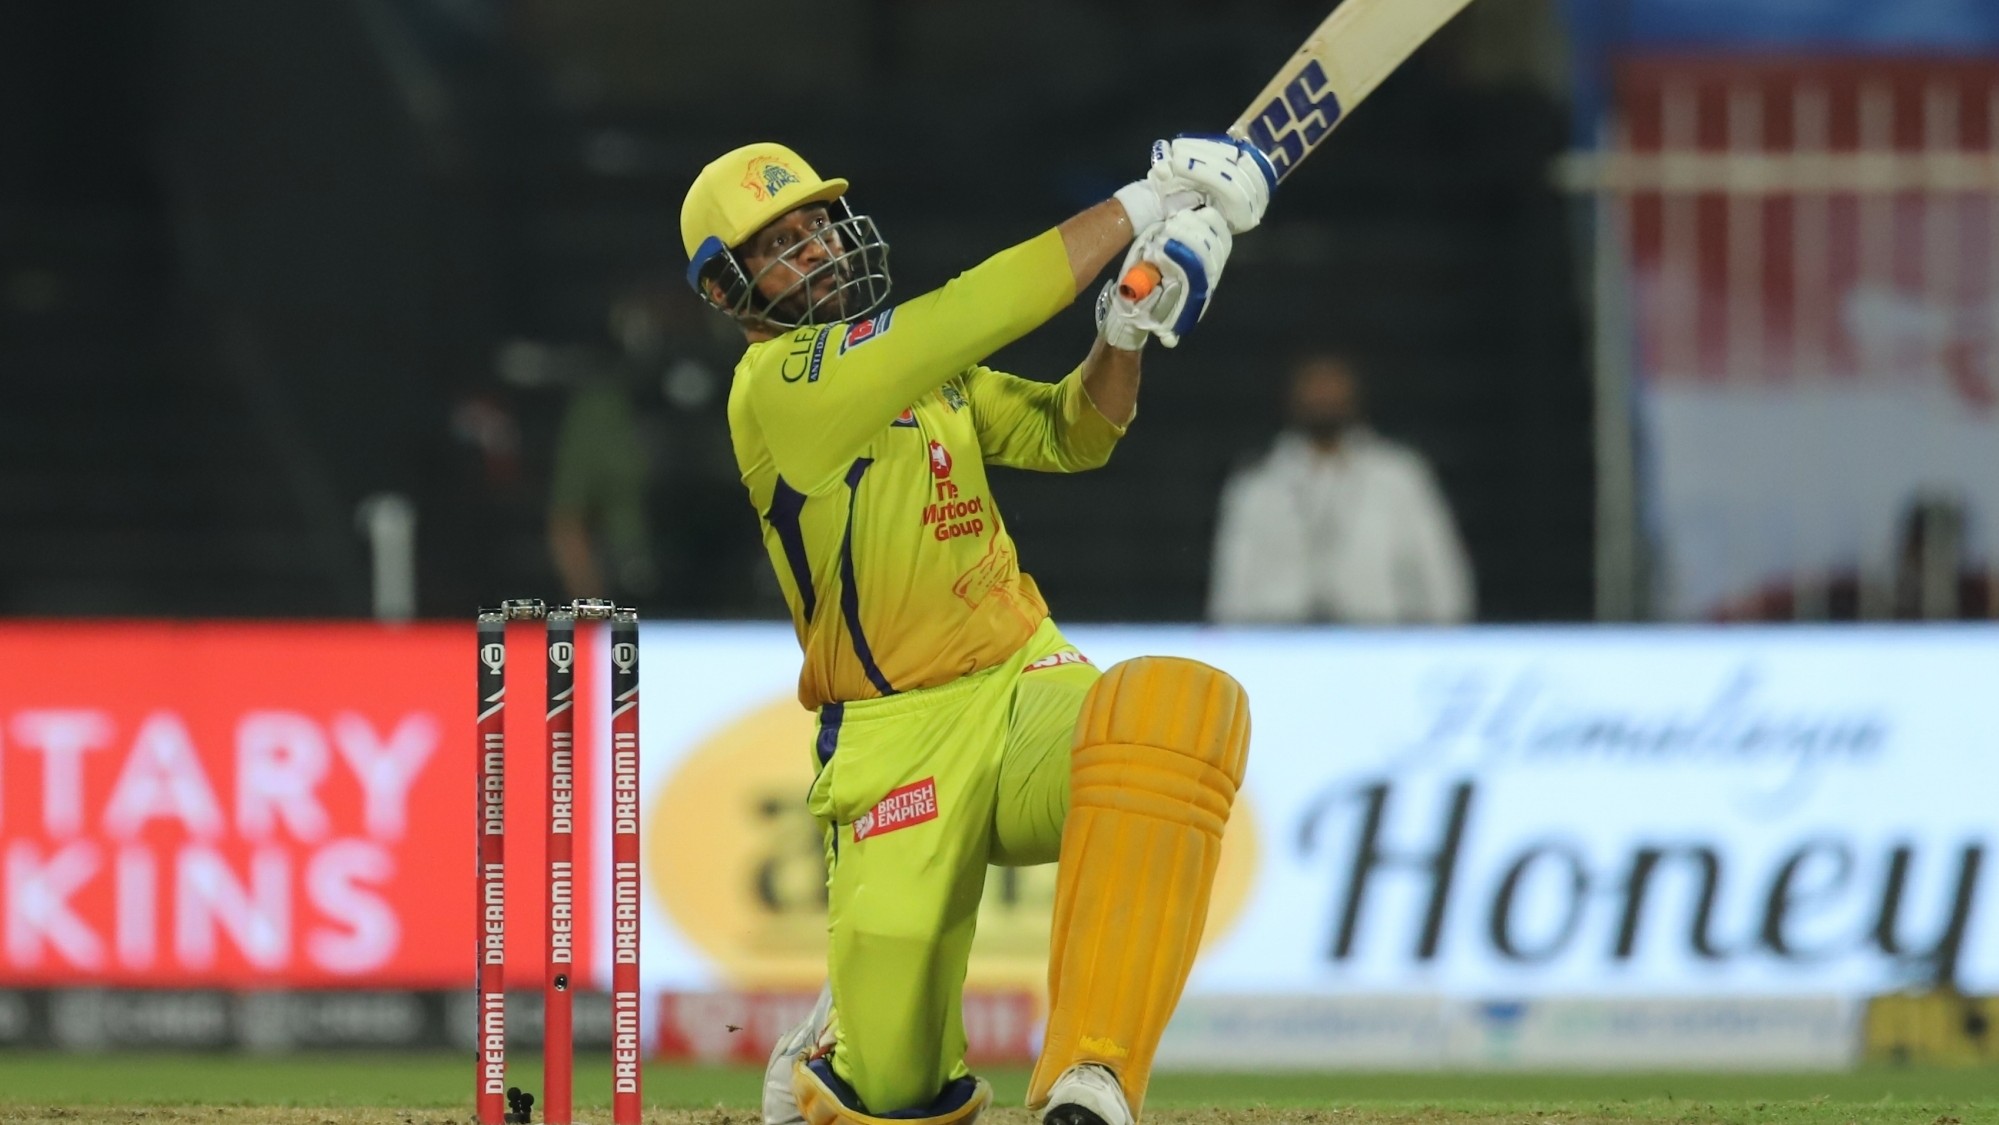 IPL 2020: MS Dhoni explains why he came to bat at No. 7 while chasing 217 against RR